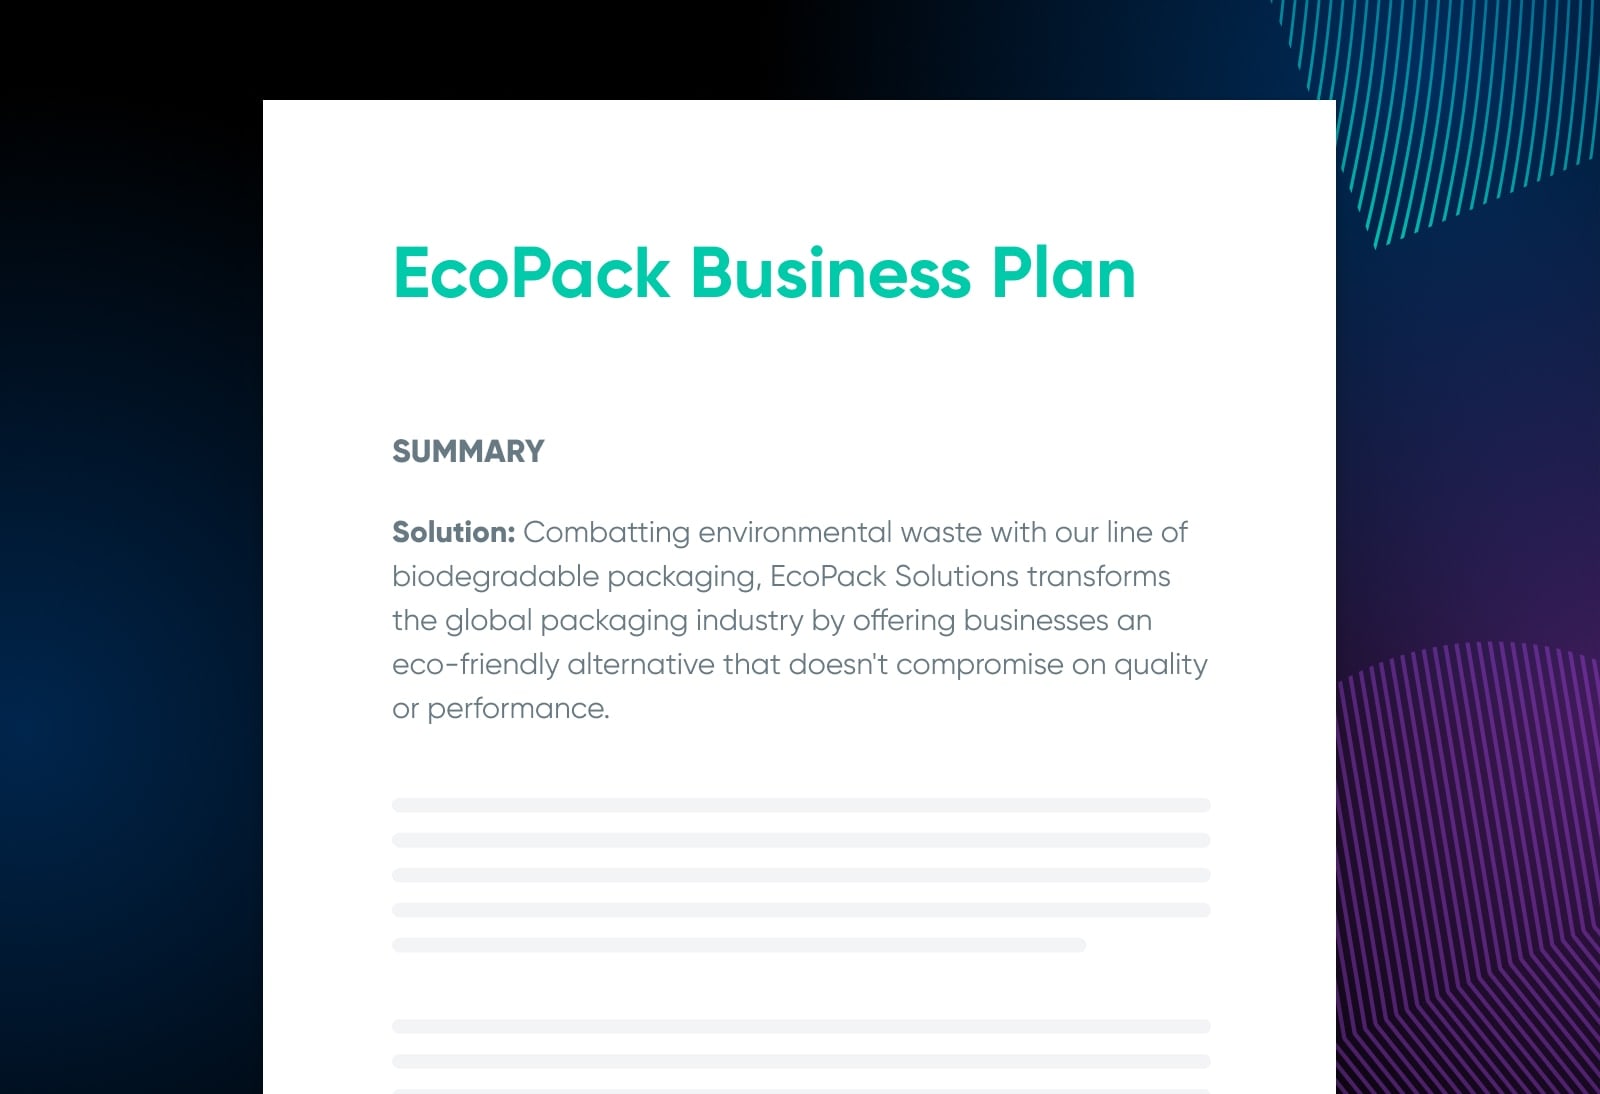 Mock-up of an "EcoPack Business Plan" with a "SUMMARY" heading and "Solution" section.